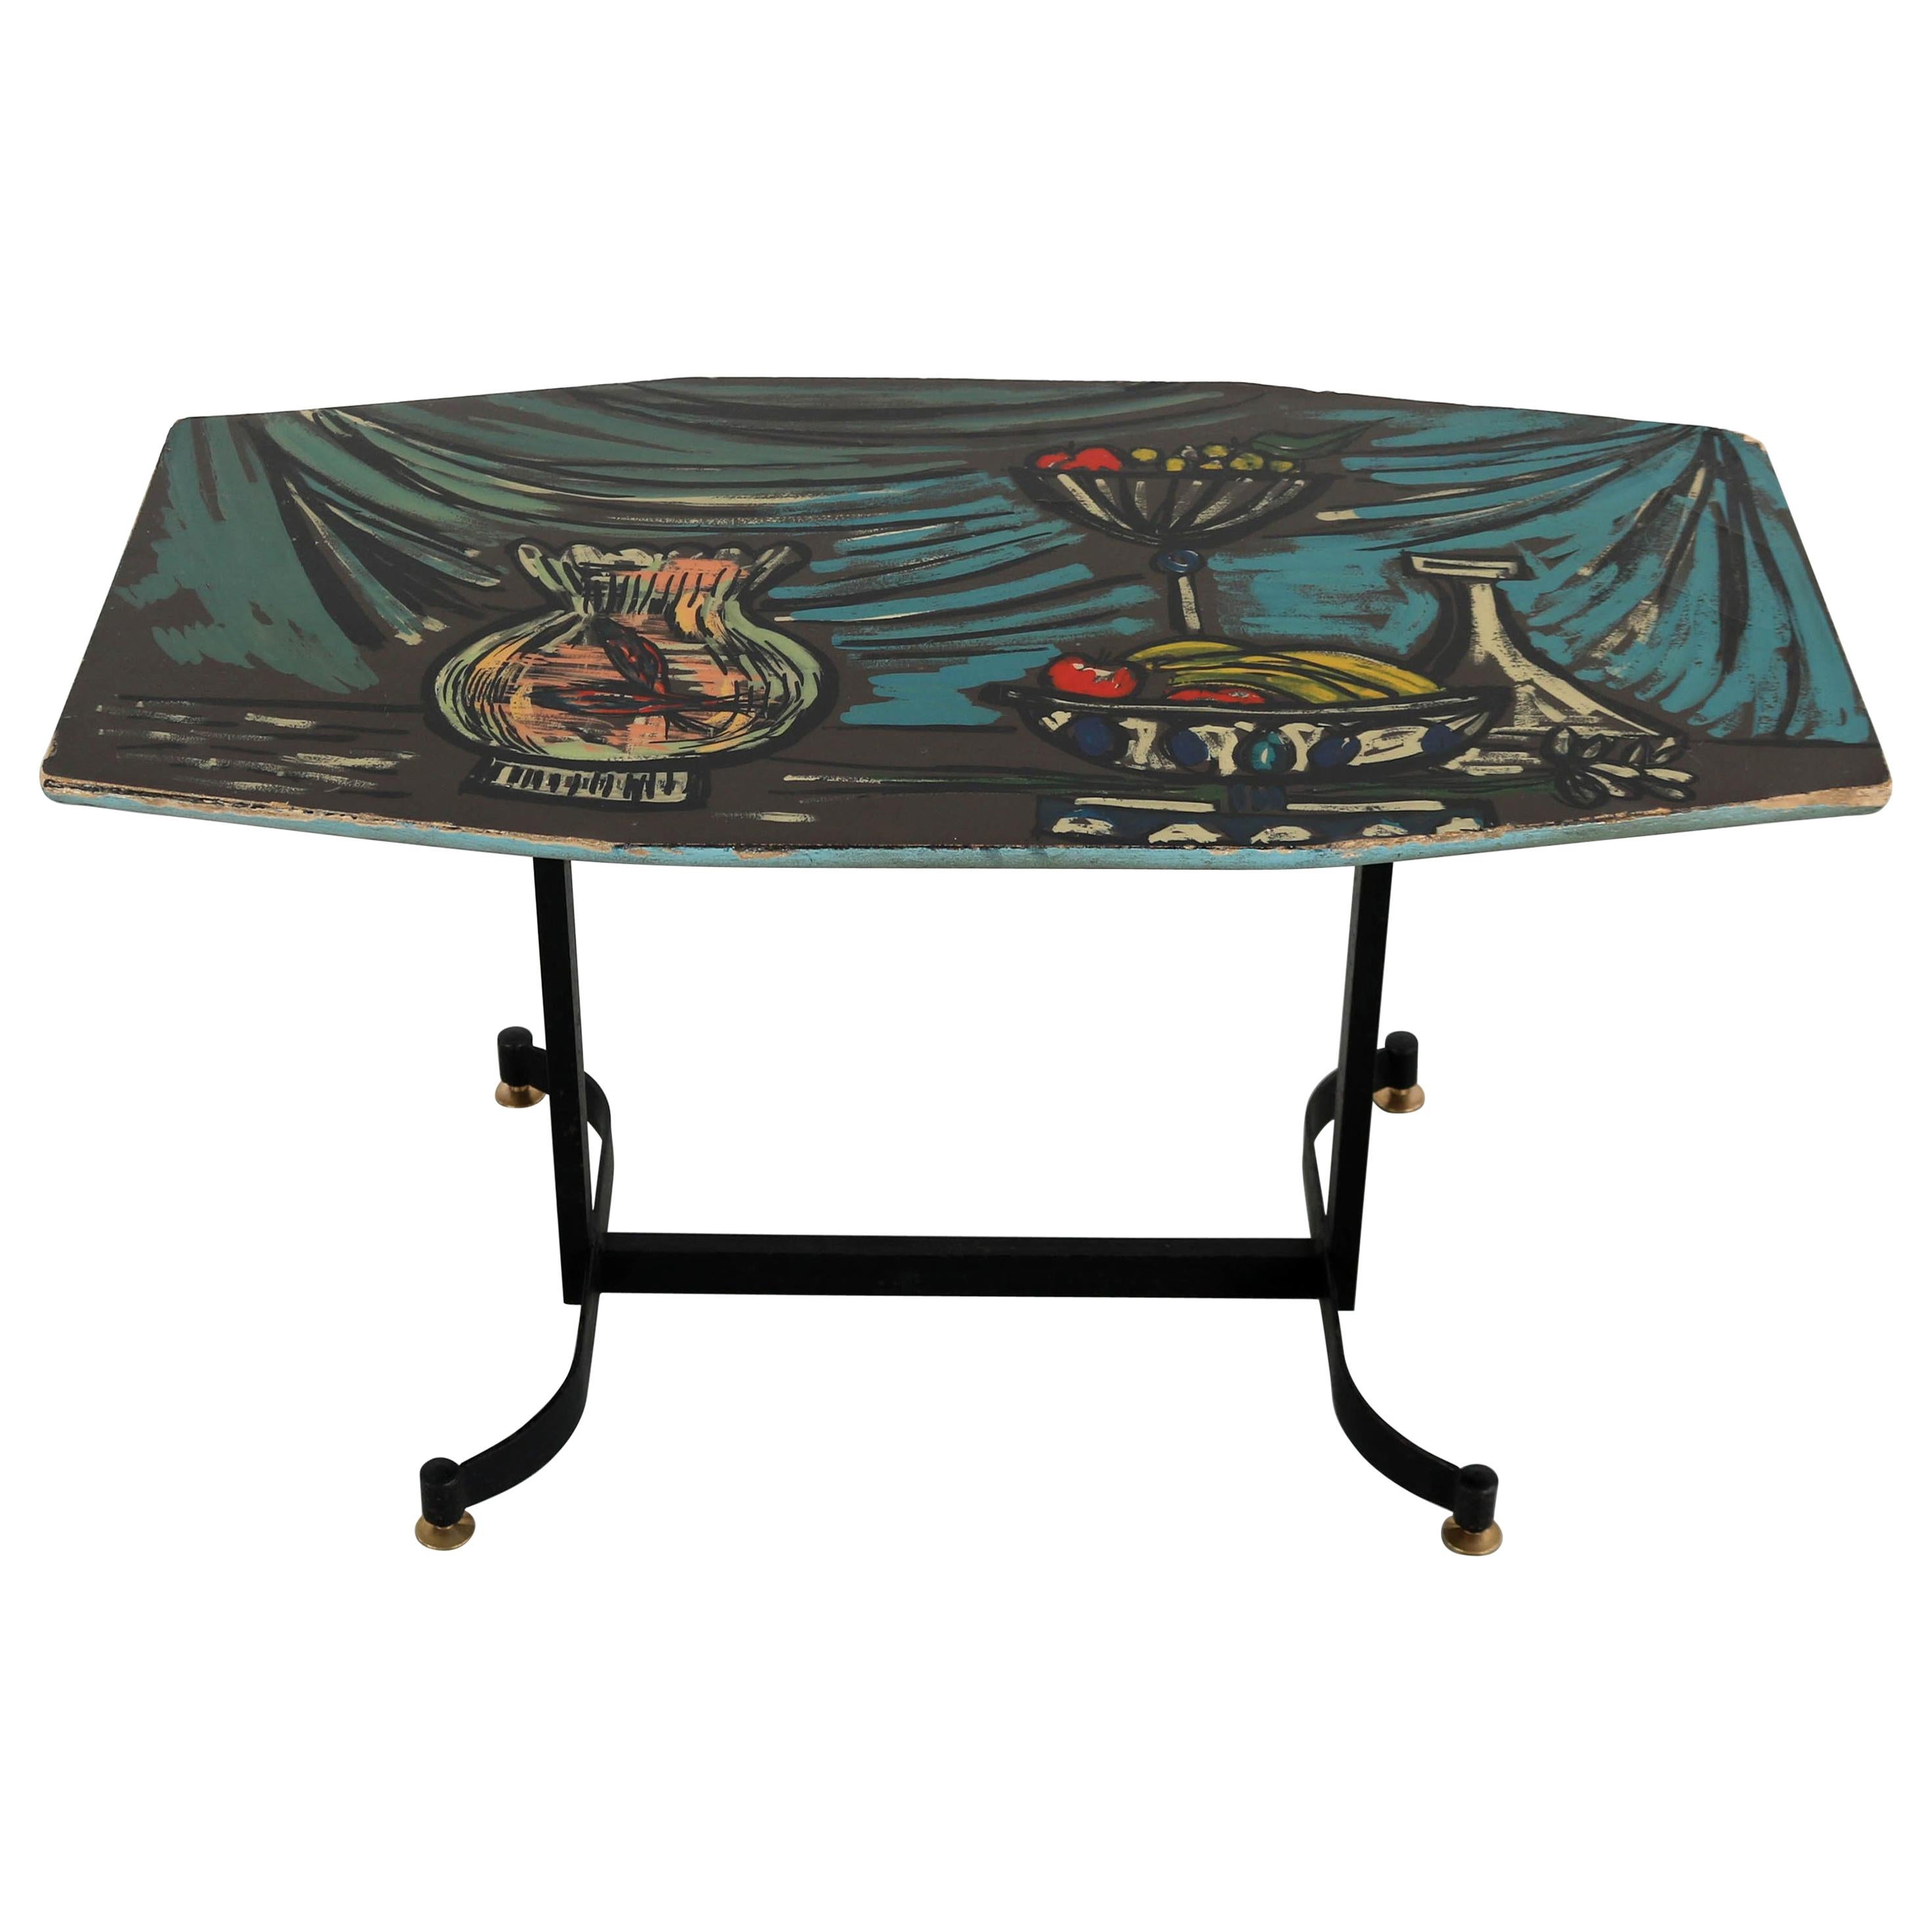 Italian Dark Sofa Table with Colorful Hand Painted Motives on Table Top, 1950s